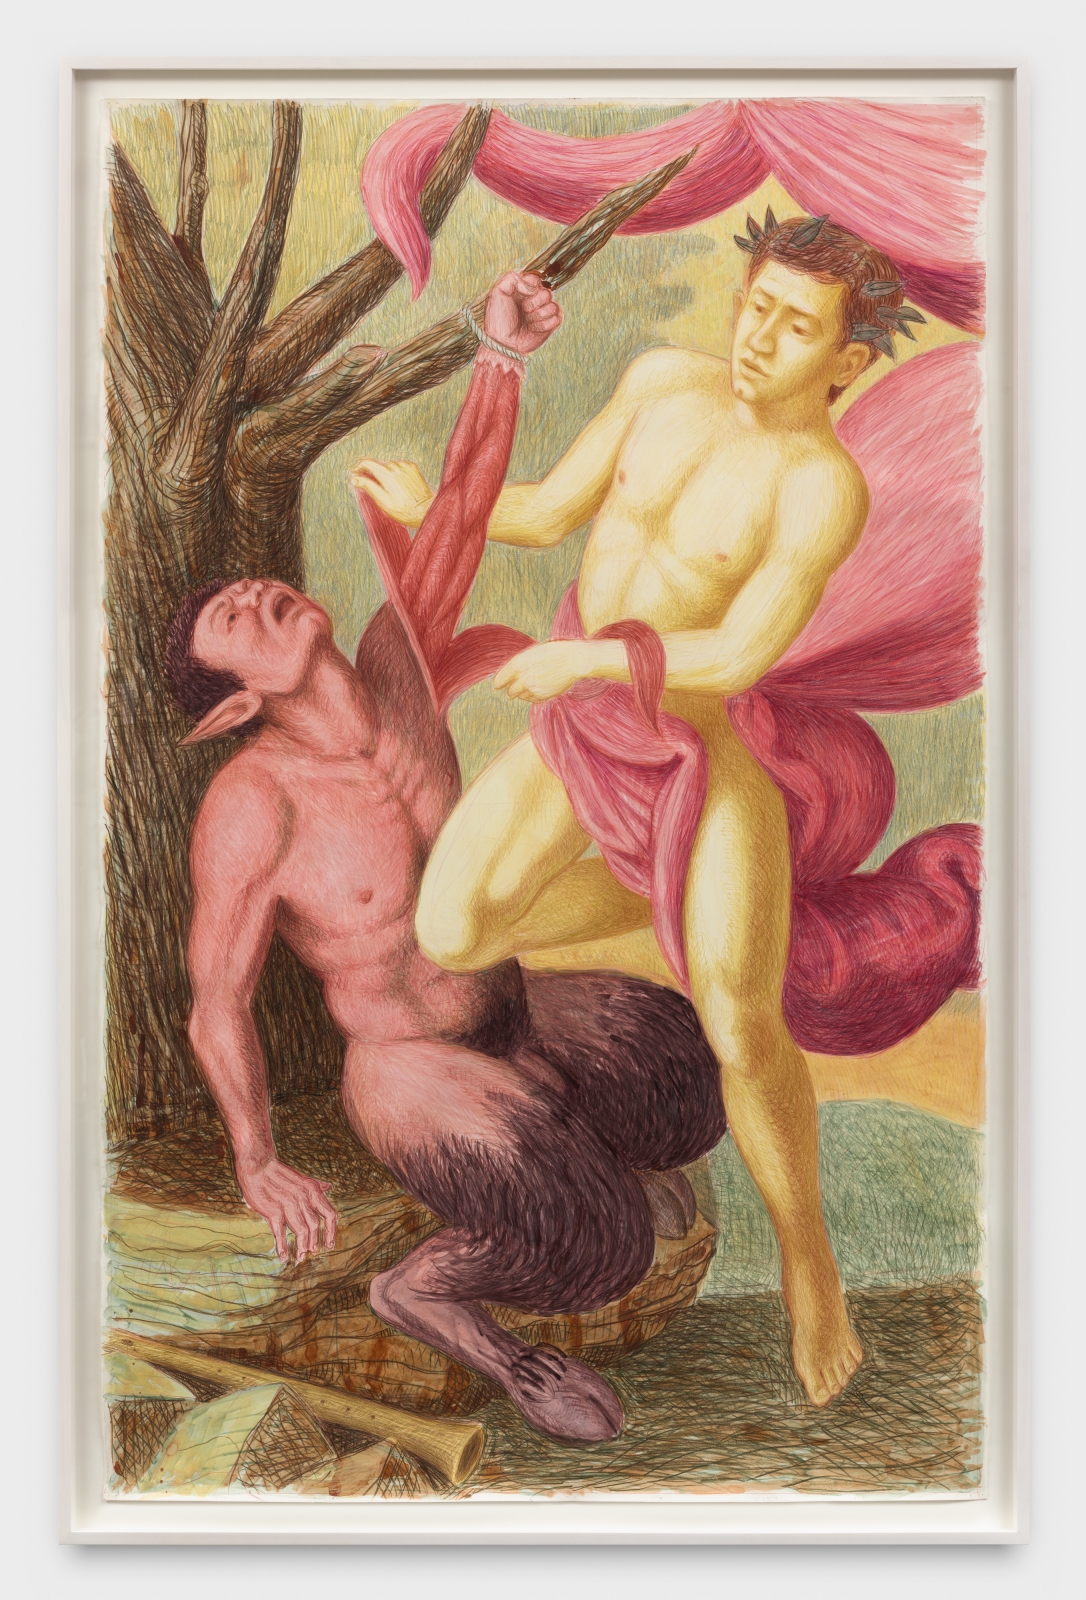 Elijah Burgher
Apollo Flaying Marsyas (after Antionio de Bellis), 2021
colored pencil and watercolor on paper
70 1/2 x 44 1/2 ins.
179 x 113 cm